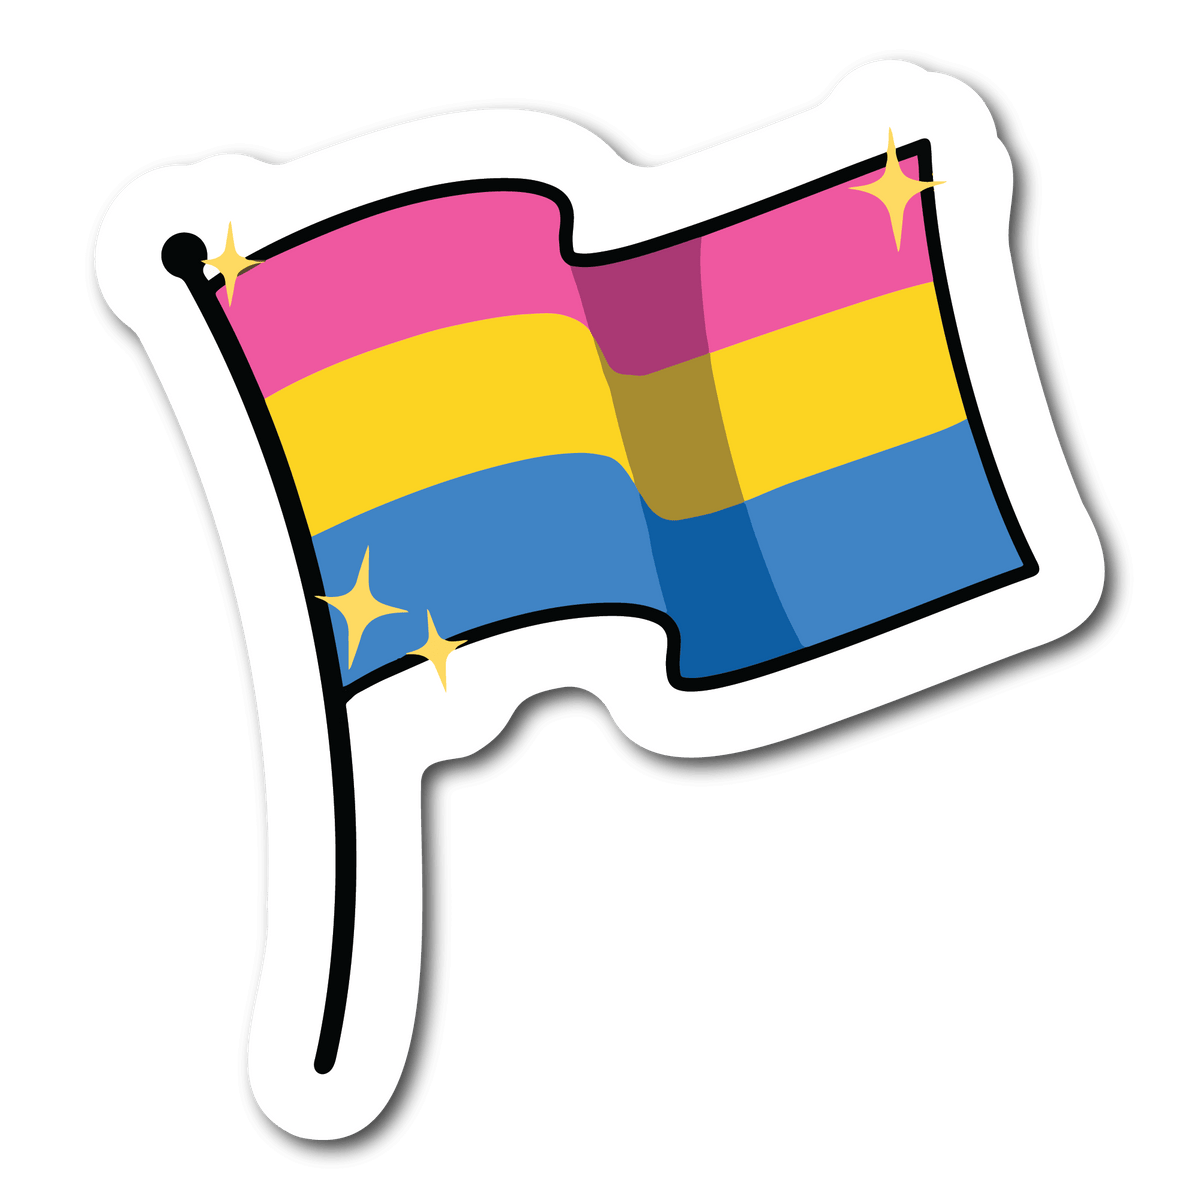 Small Pansexual Flag Waterproof Sticker for LGBTQ Name Tags